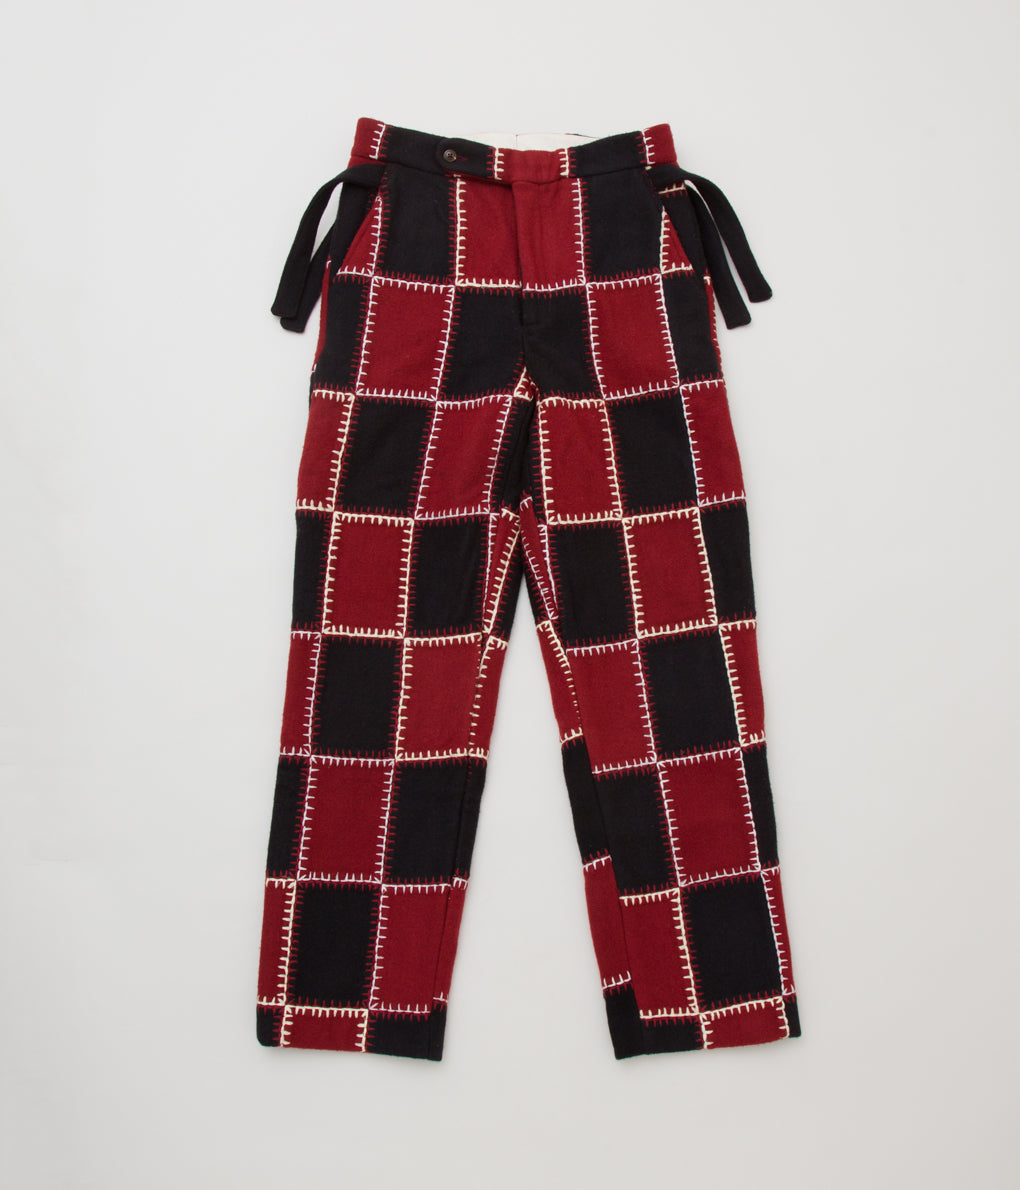 BODE "BLANKET STITCH QUILT TROUSERS" (BURGUNDY MULTI)